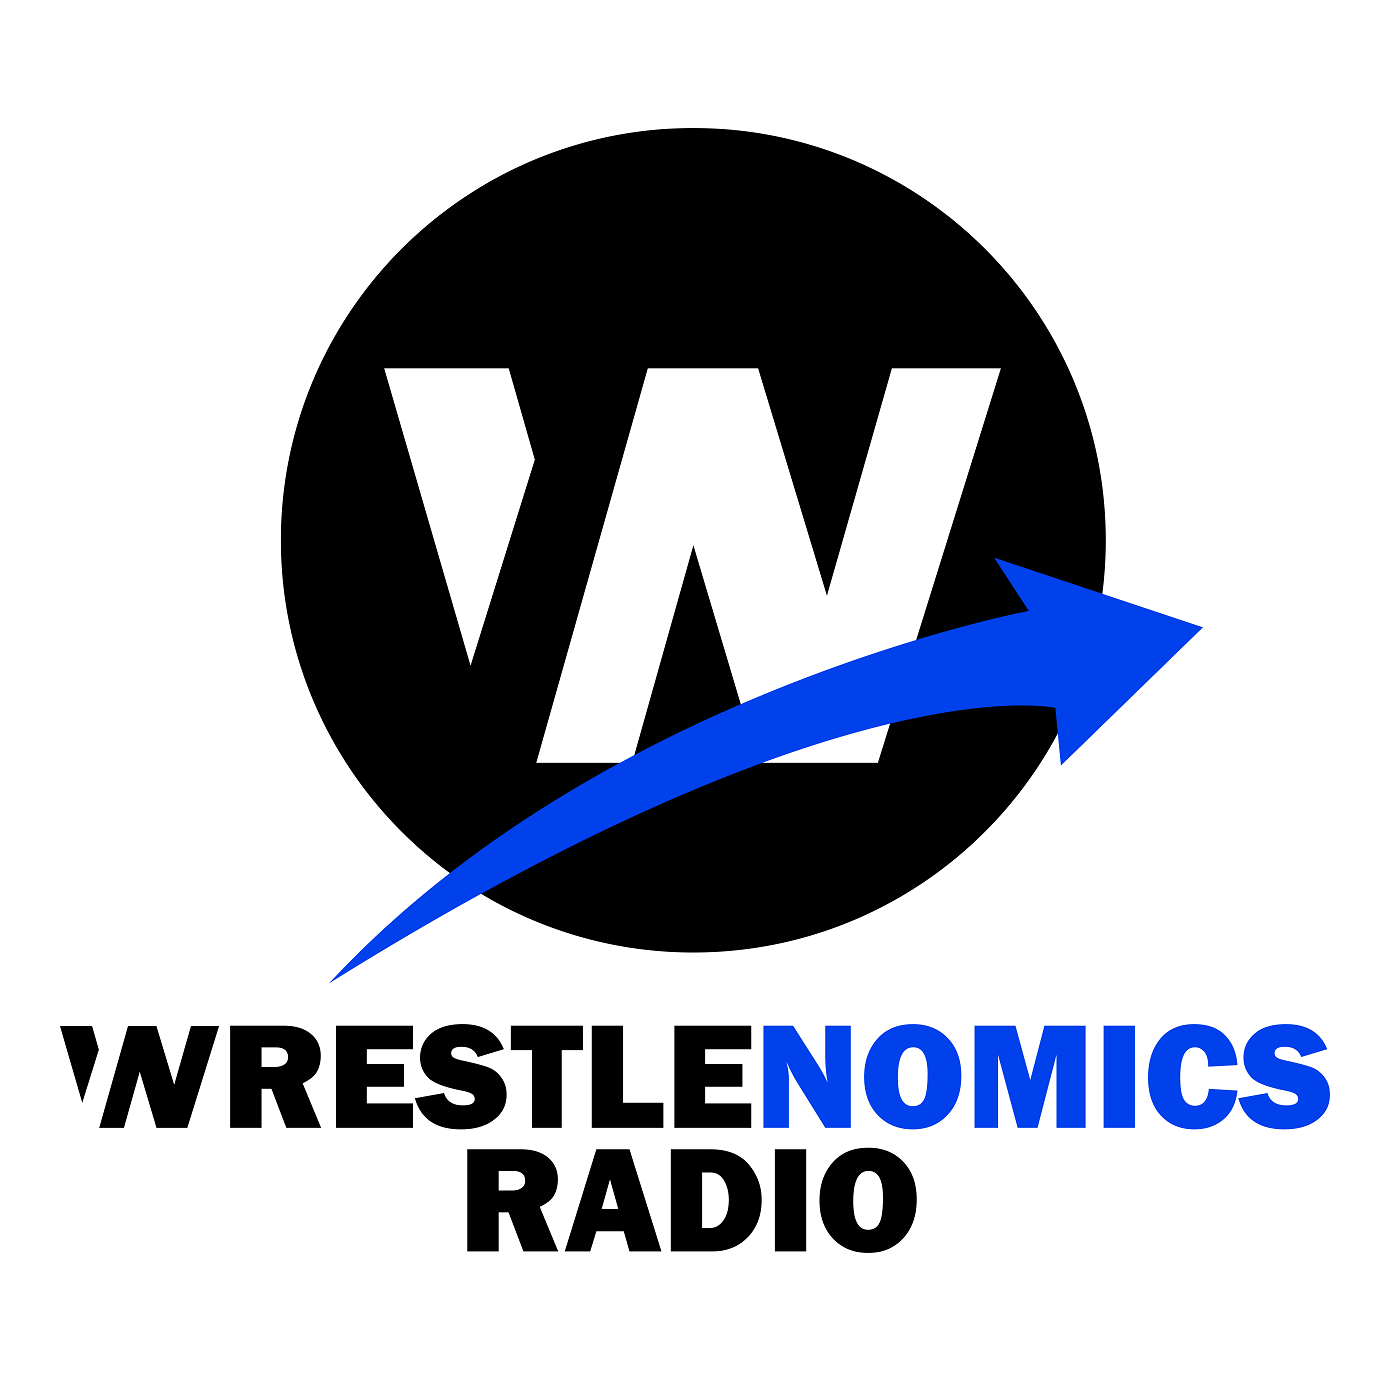 71: Wrestlenomics Radio: Latest on WWE Saudi Arabia with guest Mike Sempervive